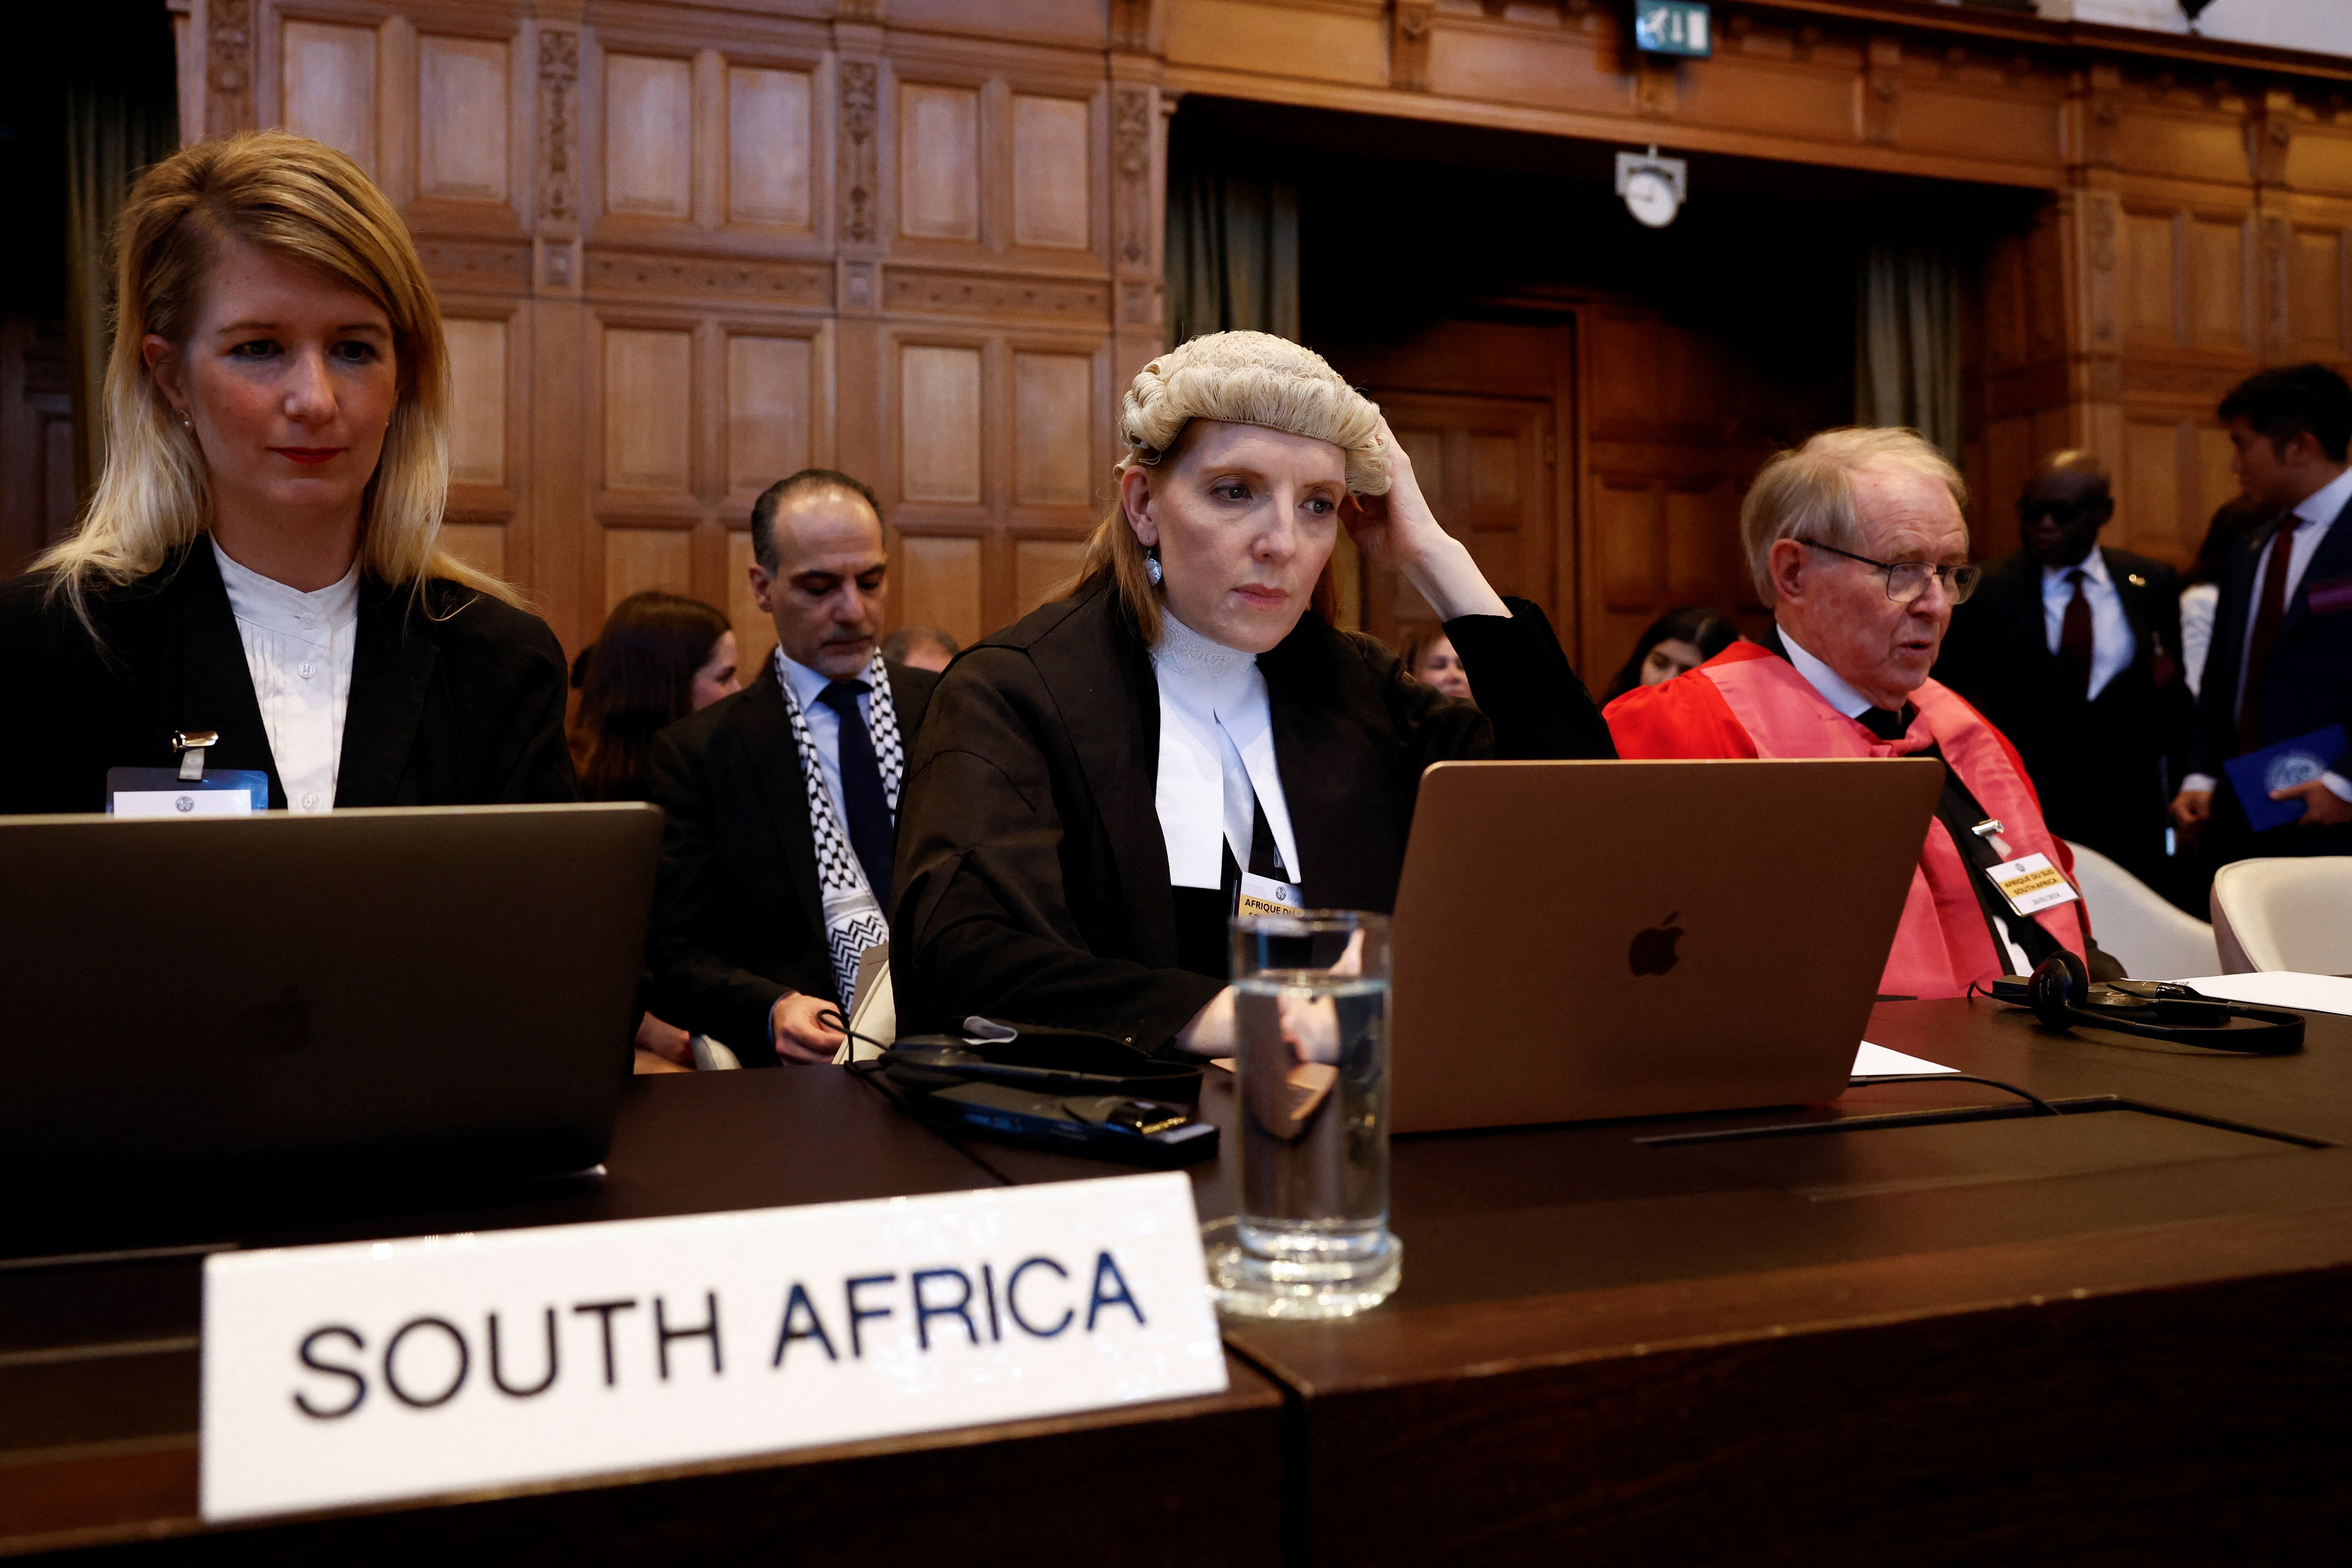 South Africa brought the allegations of genocide to the International Court of Justice